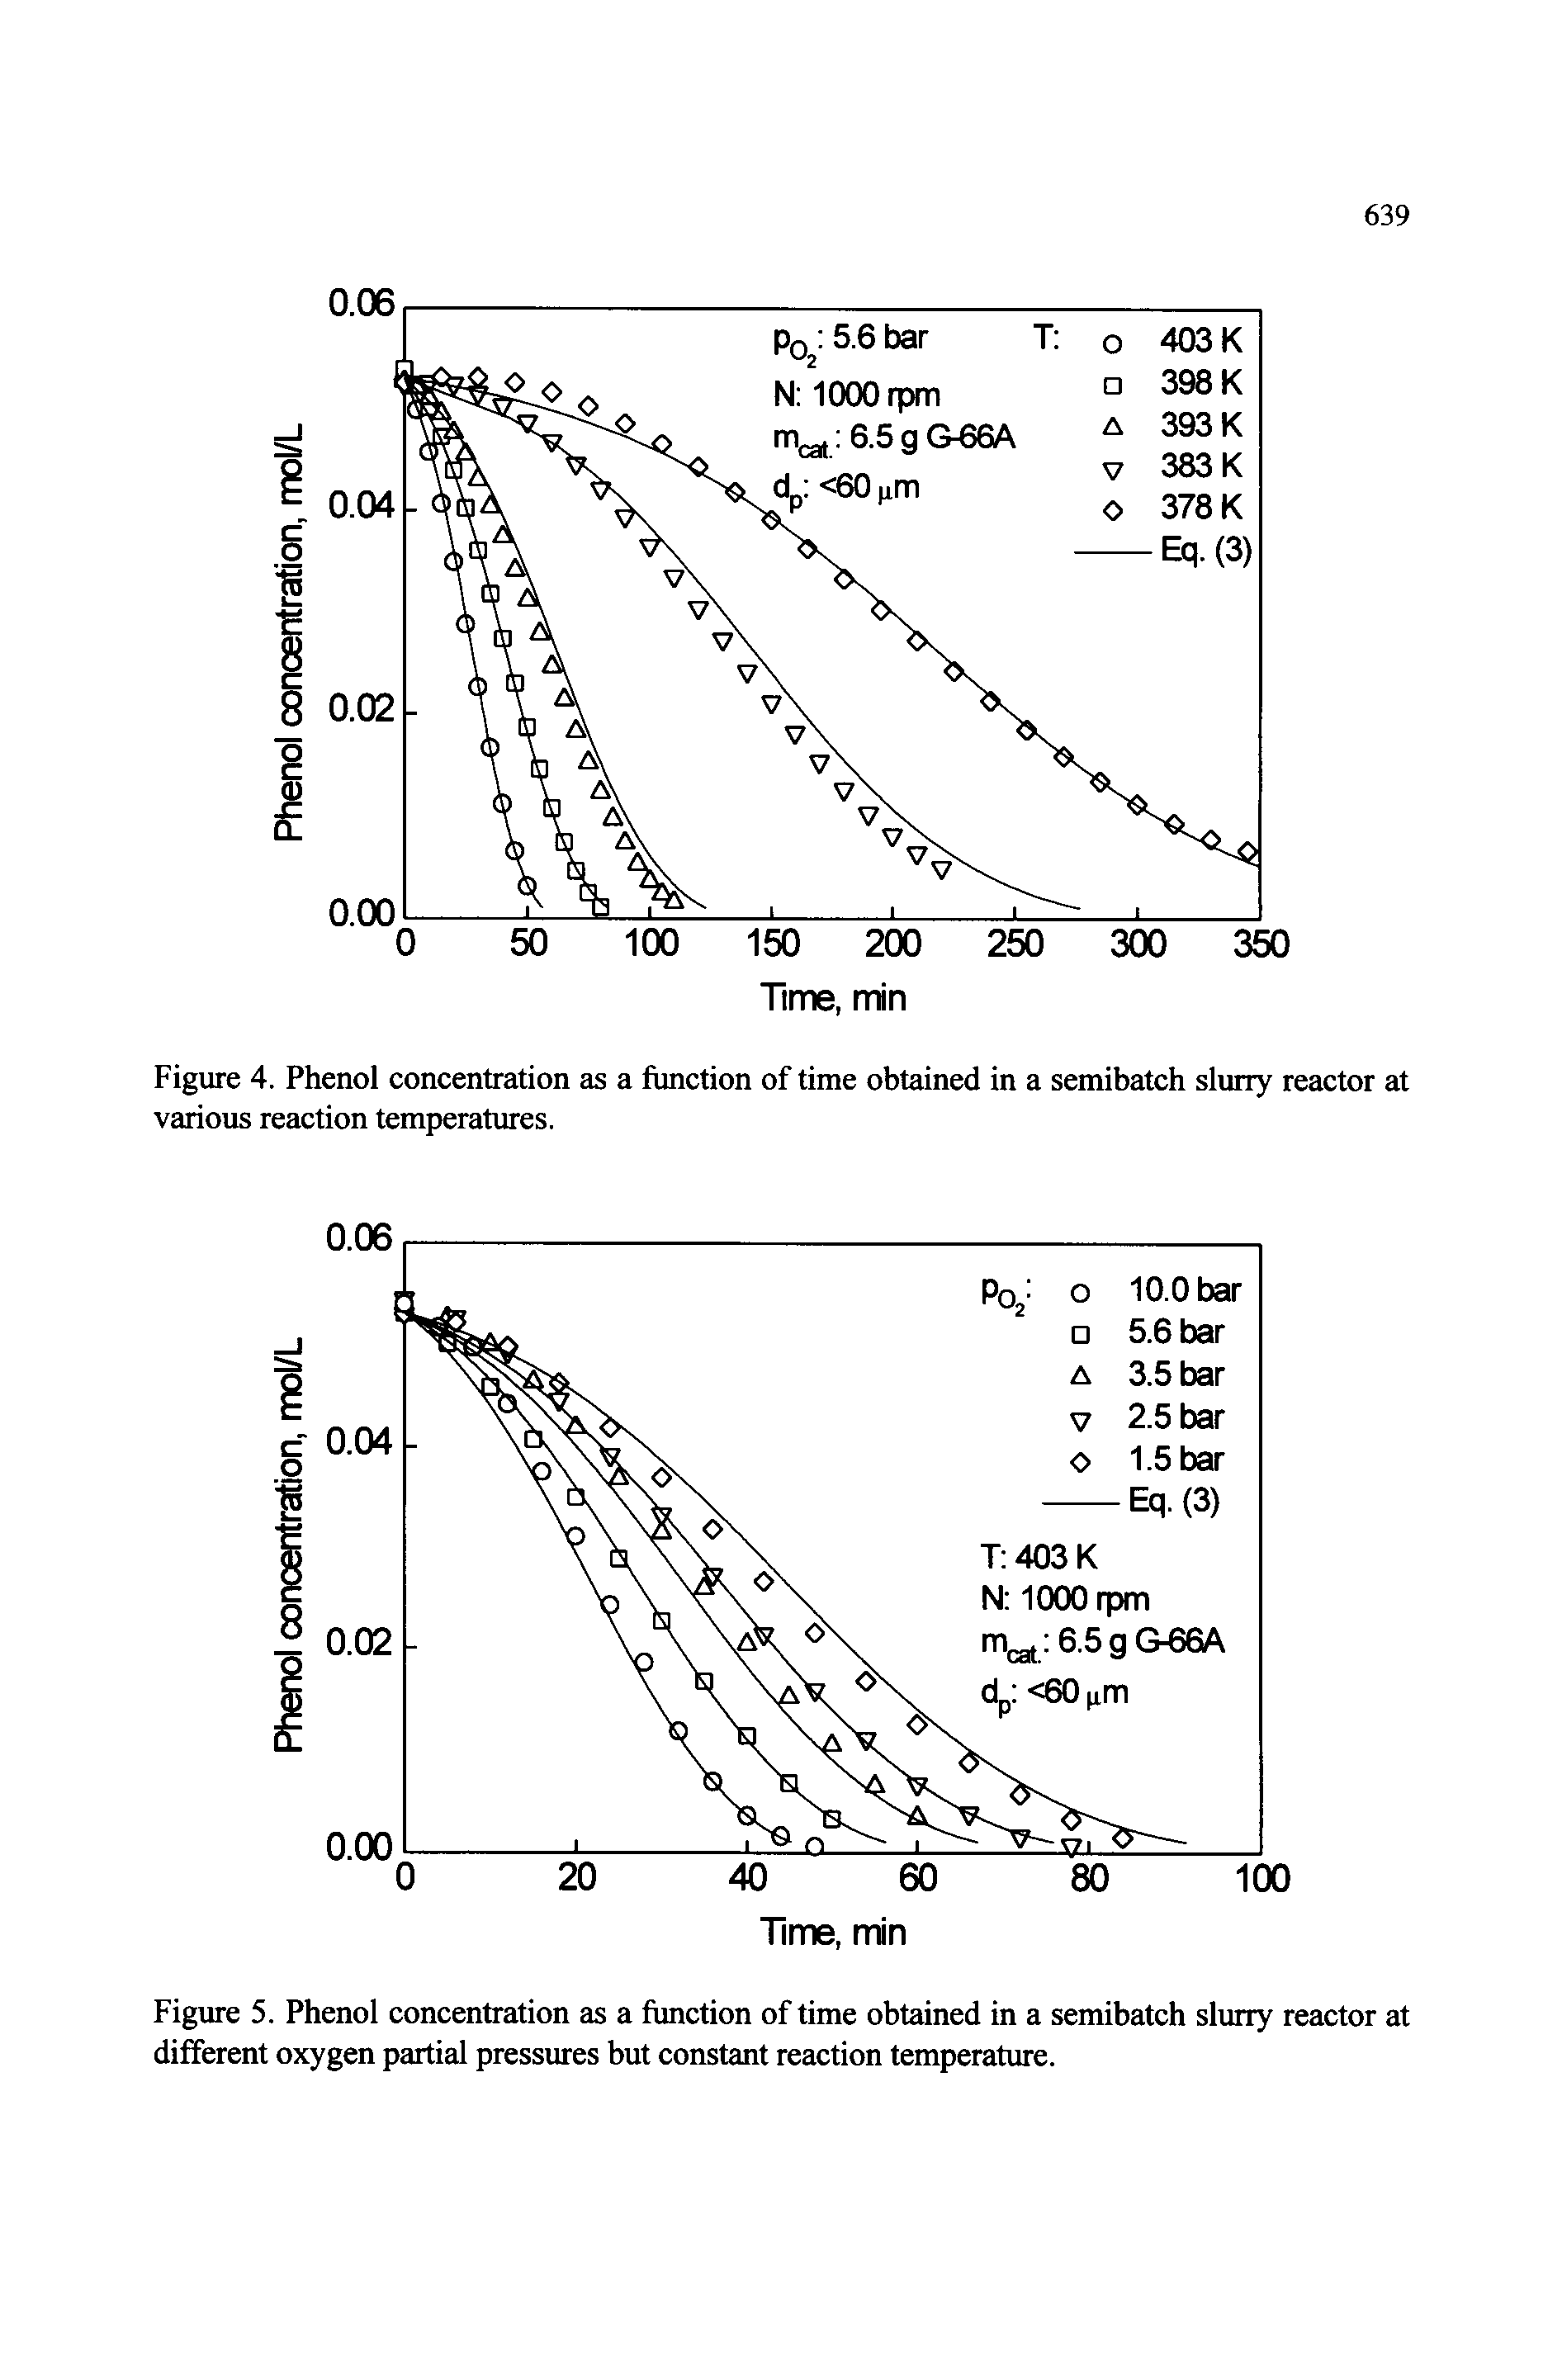 Figure 5. Phenol concentration as a function of time obtained in a semibatch slurry reactor at different oxygen partial pressures but constant reaction temperature.